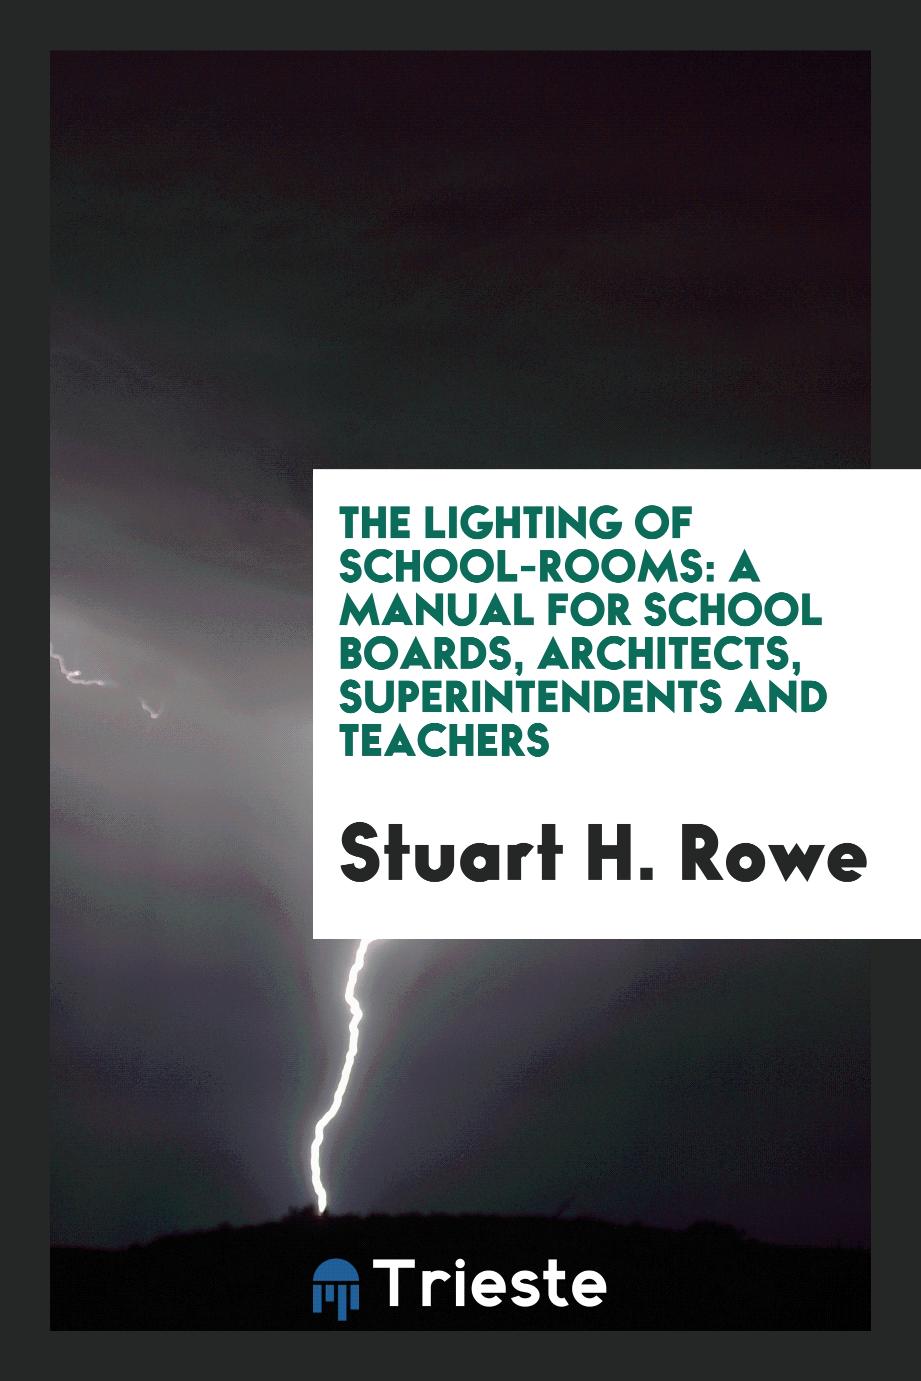 The Lighting of School-Rooms: A Manual for School Boards, Architects, Superintendents and Teachers